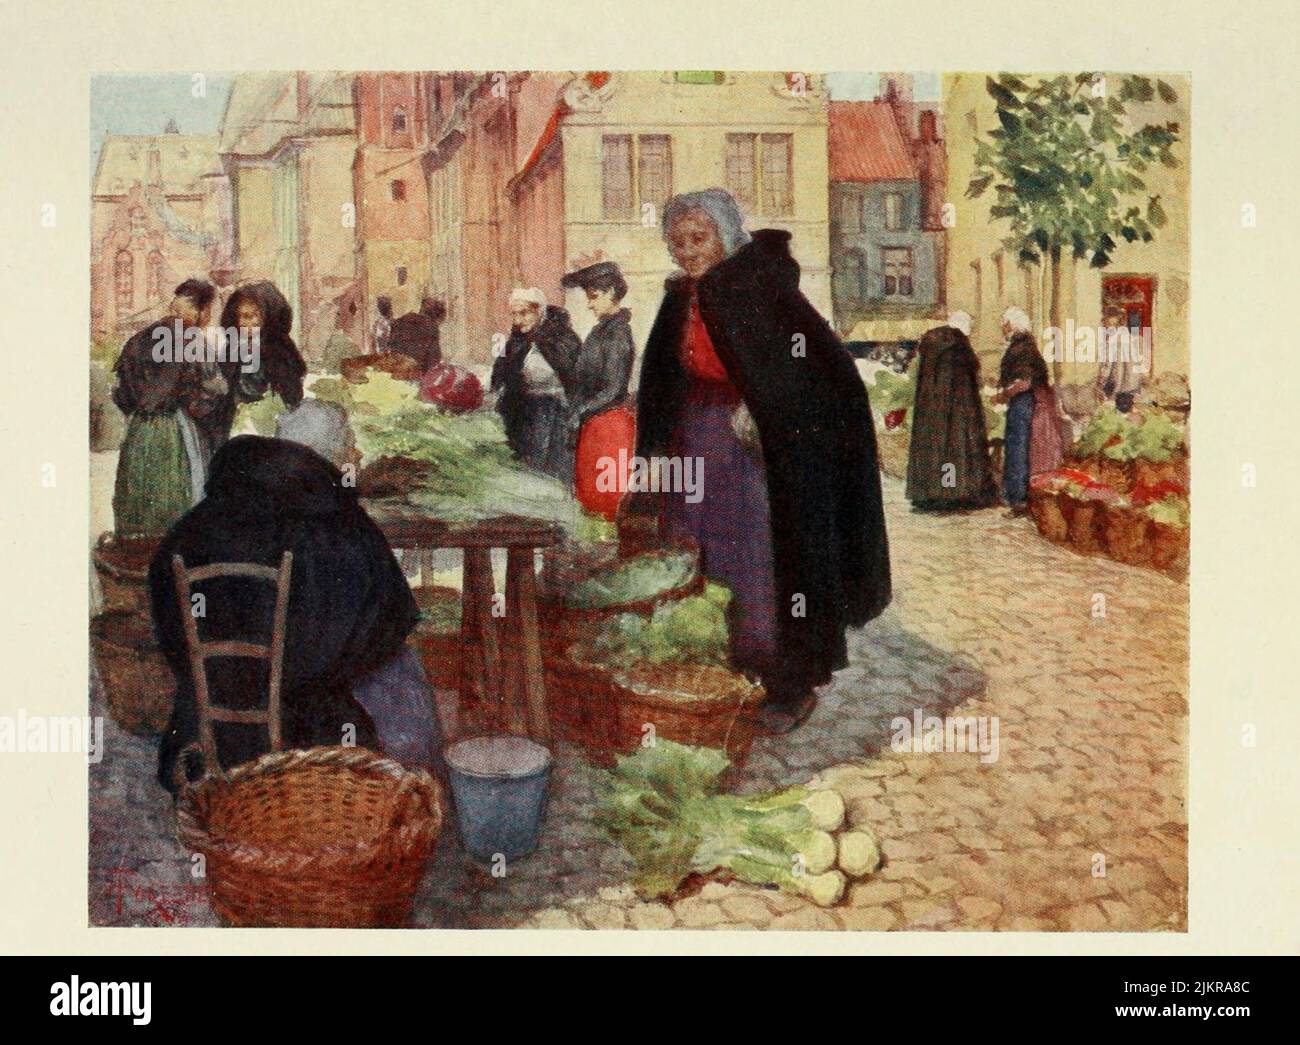 Bruges: Vegetable Market Painted by Amedee Forestier, from the book '  Bruges and West Flanders ' by George William Thomson Omond, Publication date 1906 Publisher London : A. & C. Black Sir Amédée Forestier (Paris 1854 – 18 November 1930 London) was an Anglo-French artist and illustrator who specialised in historical and prehistoric scenes, and landscapes. Stock Photo